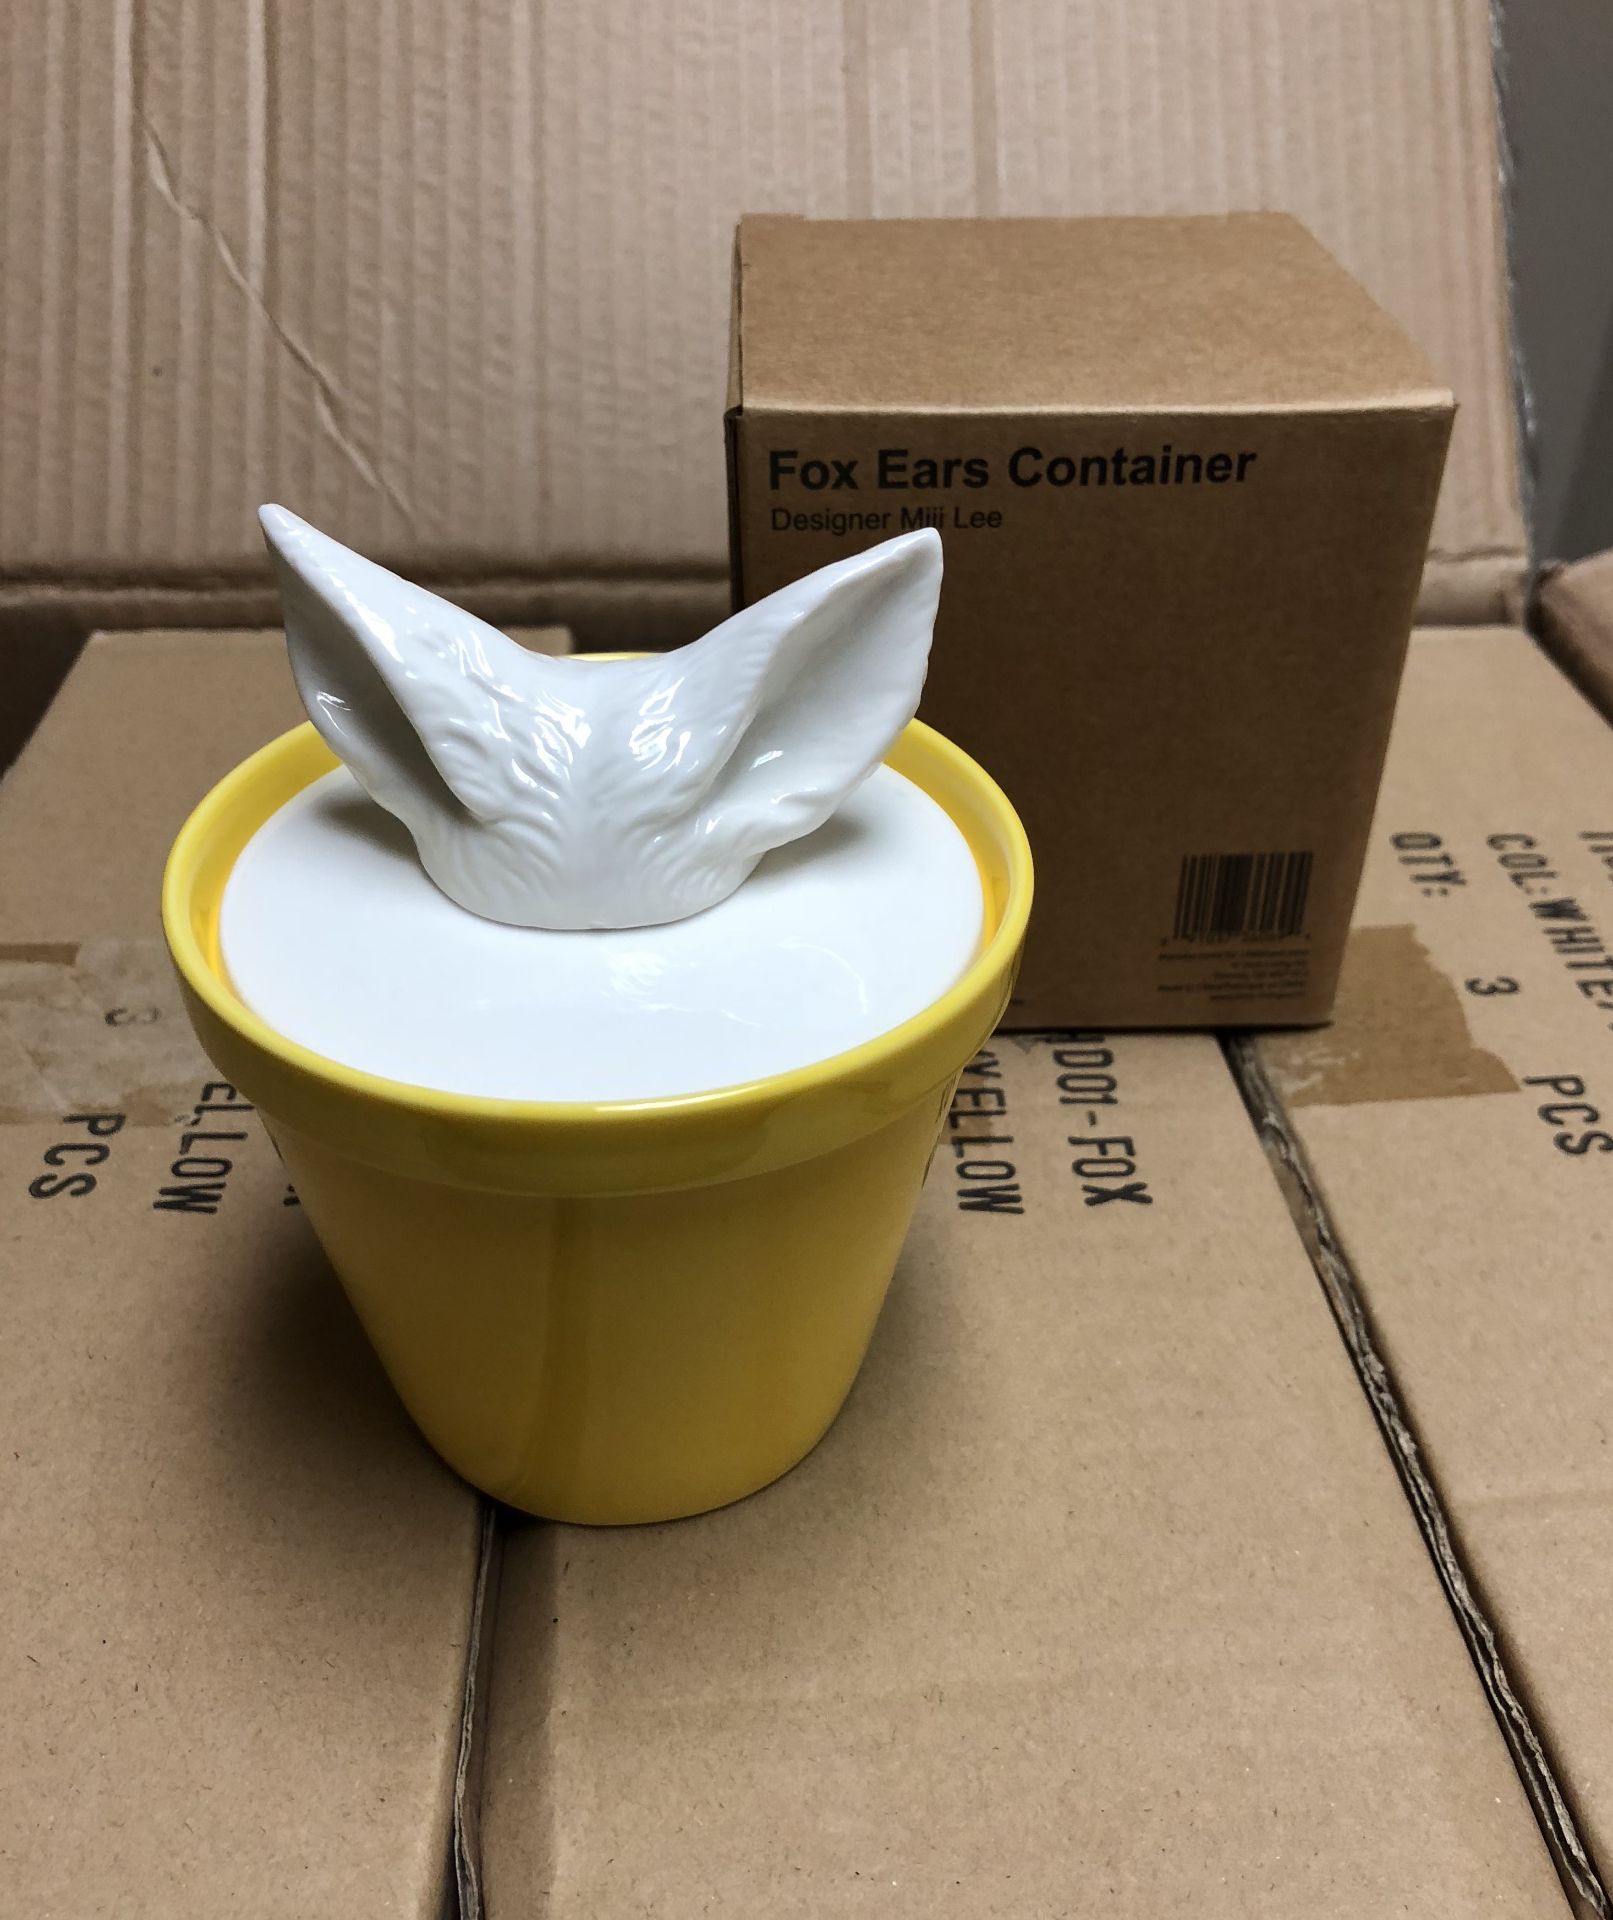 45 X IMM FOX EARS CONTAINER HOLDER - Image 2 of 3